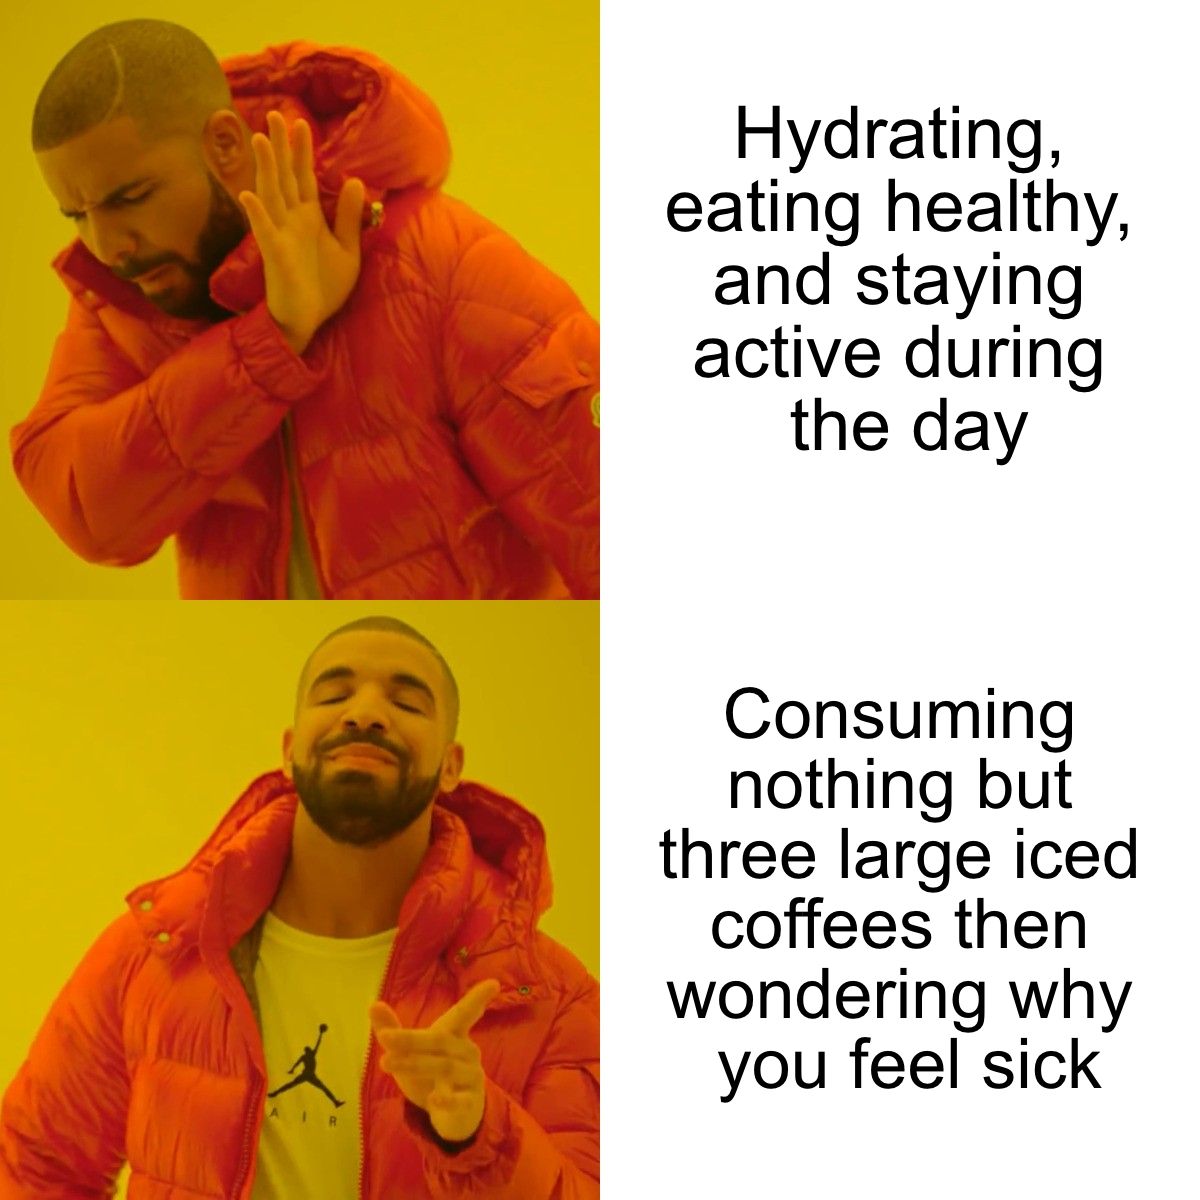 Hotline Bling meme with Drake and the text, "Hydrating, eating healthy, and staying active during the day" vs. "Consuming nothing but three large iced coffees then wondering why you feel sick"